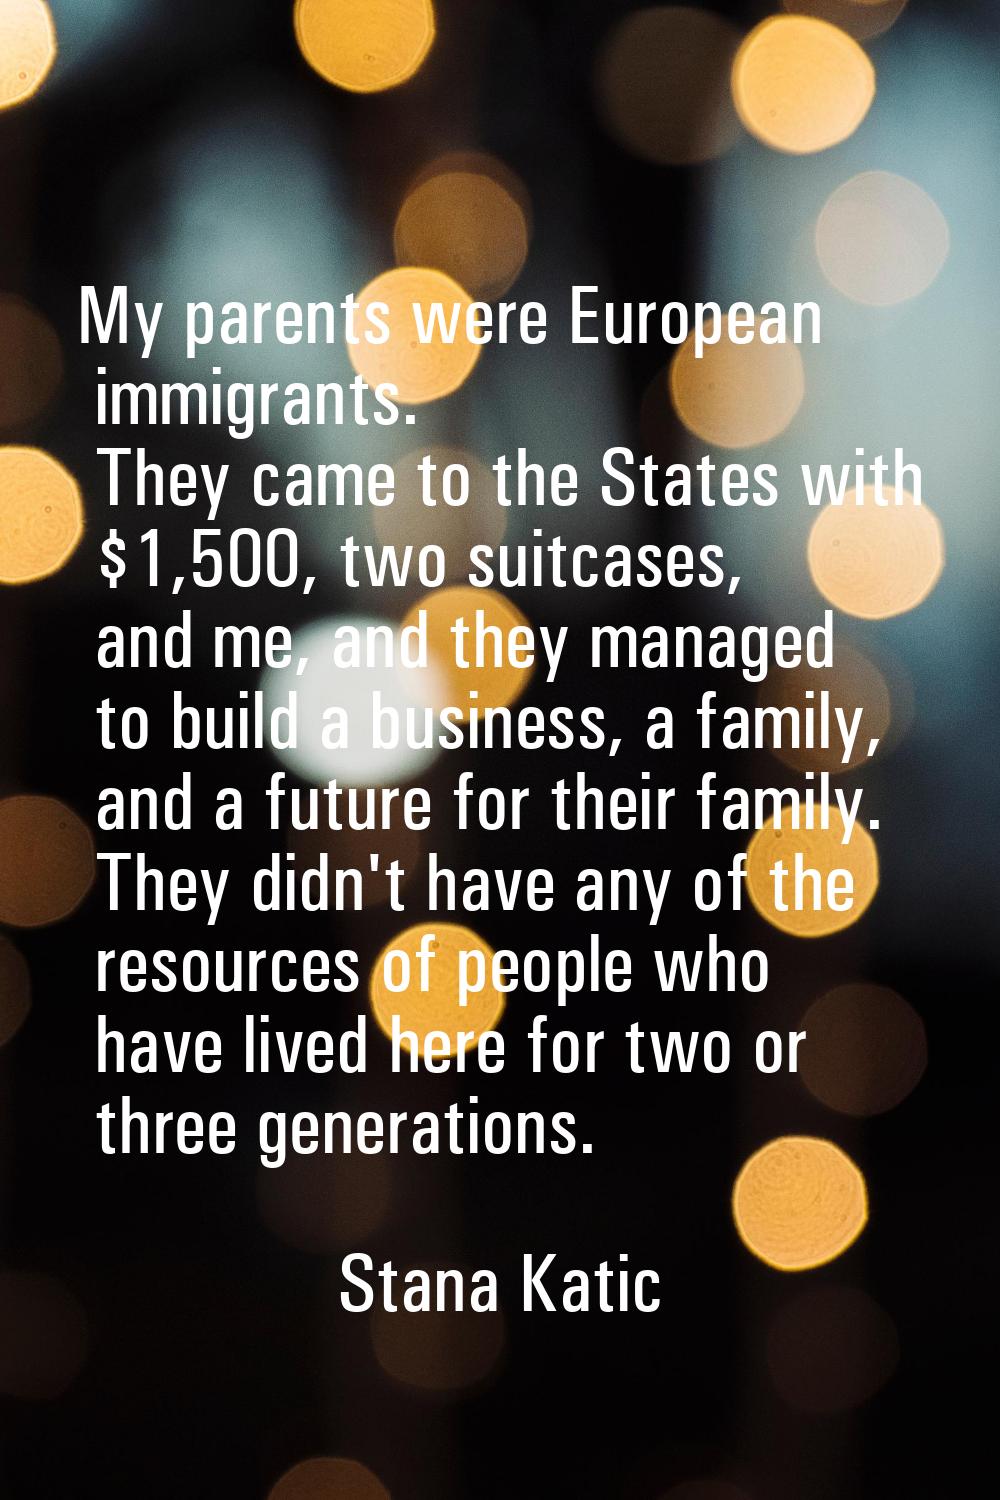 My parents were European immigrants. They came to the States with $1,500, two suitcases, and me, an